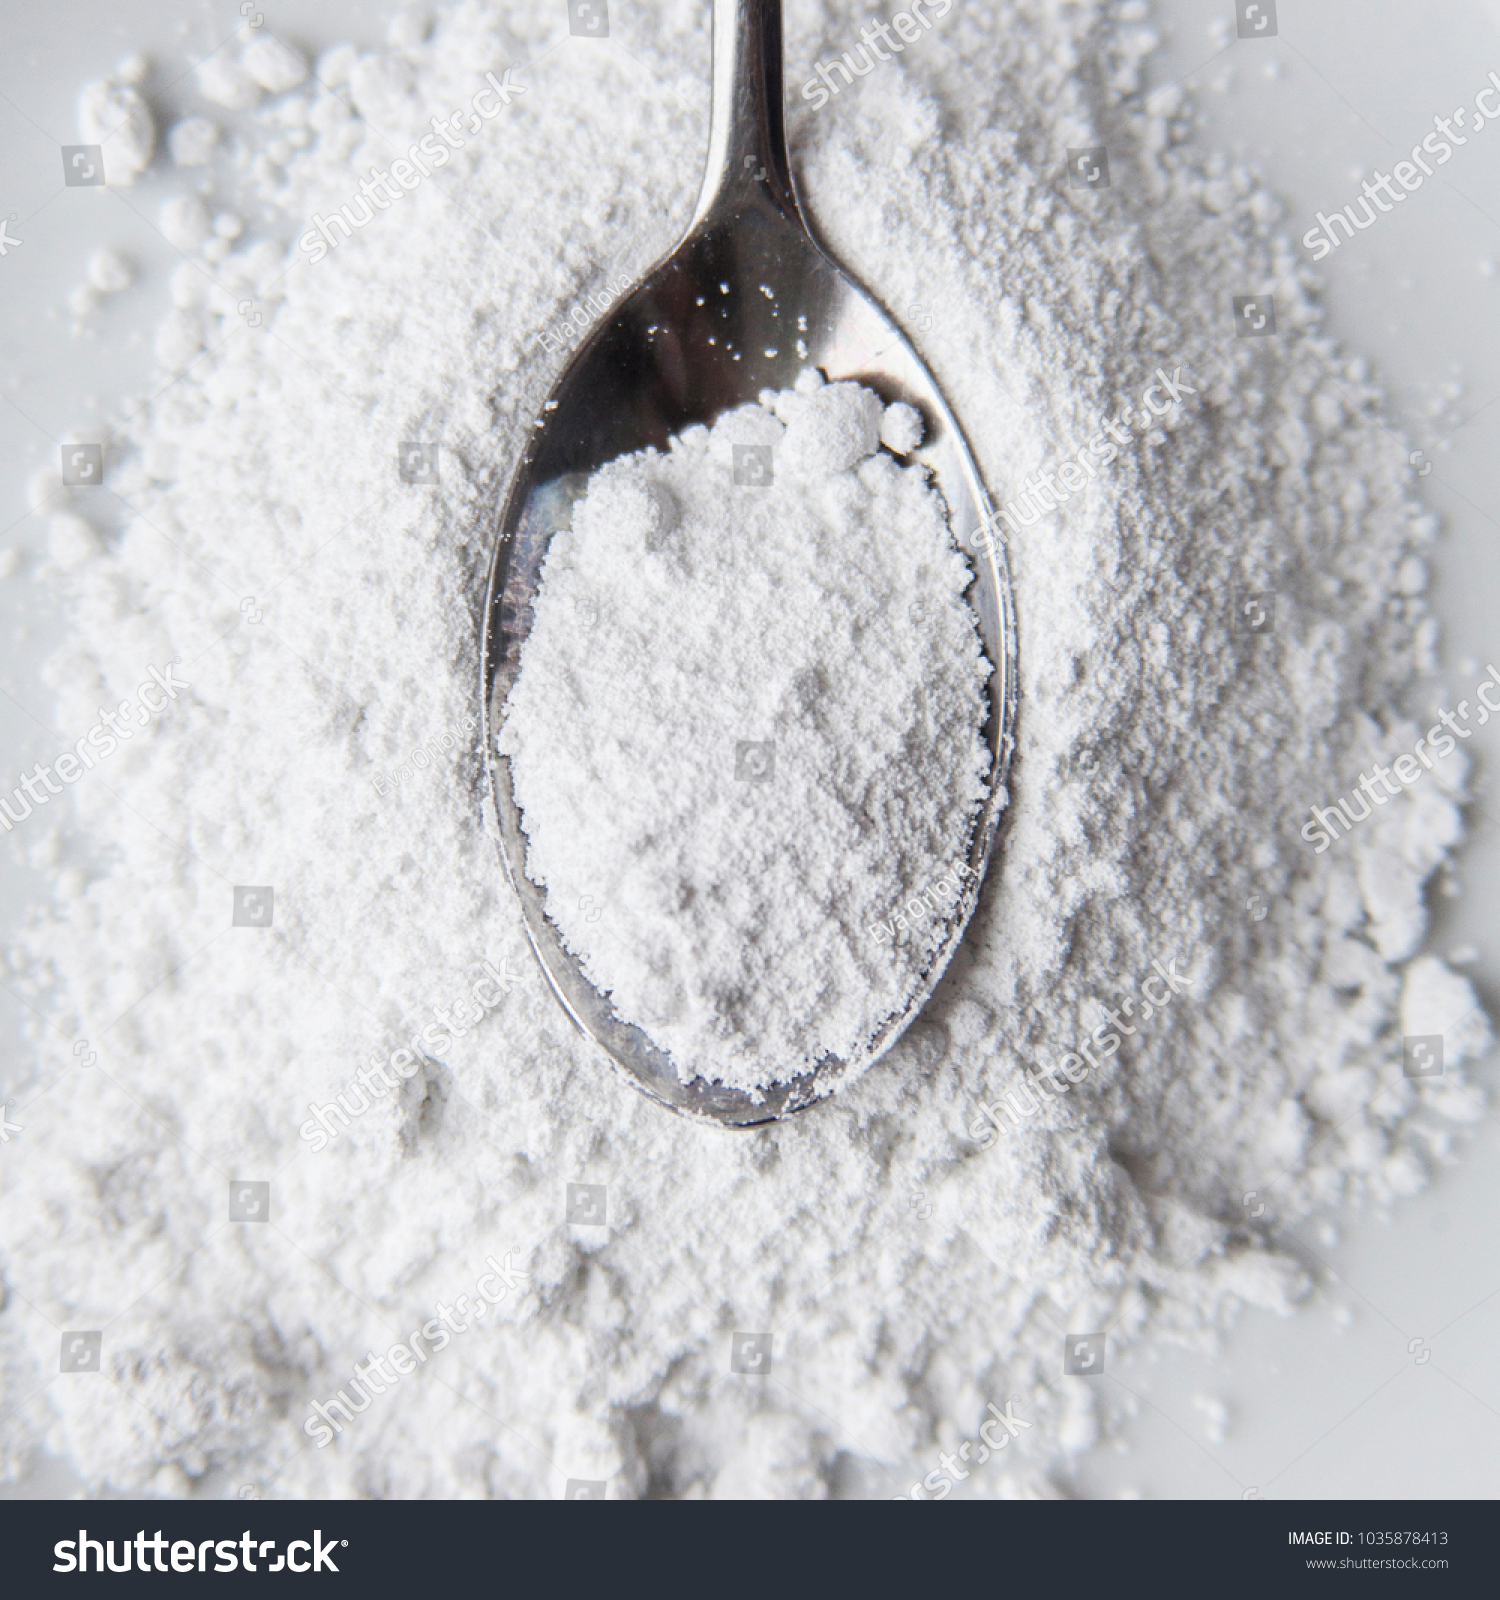 White powder in silver spoon over white background. Top view. Detailed close-up shot. Icing, caster, confectioners or powdere sugar pile. #1035878413